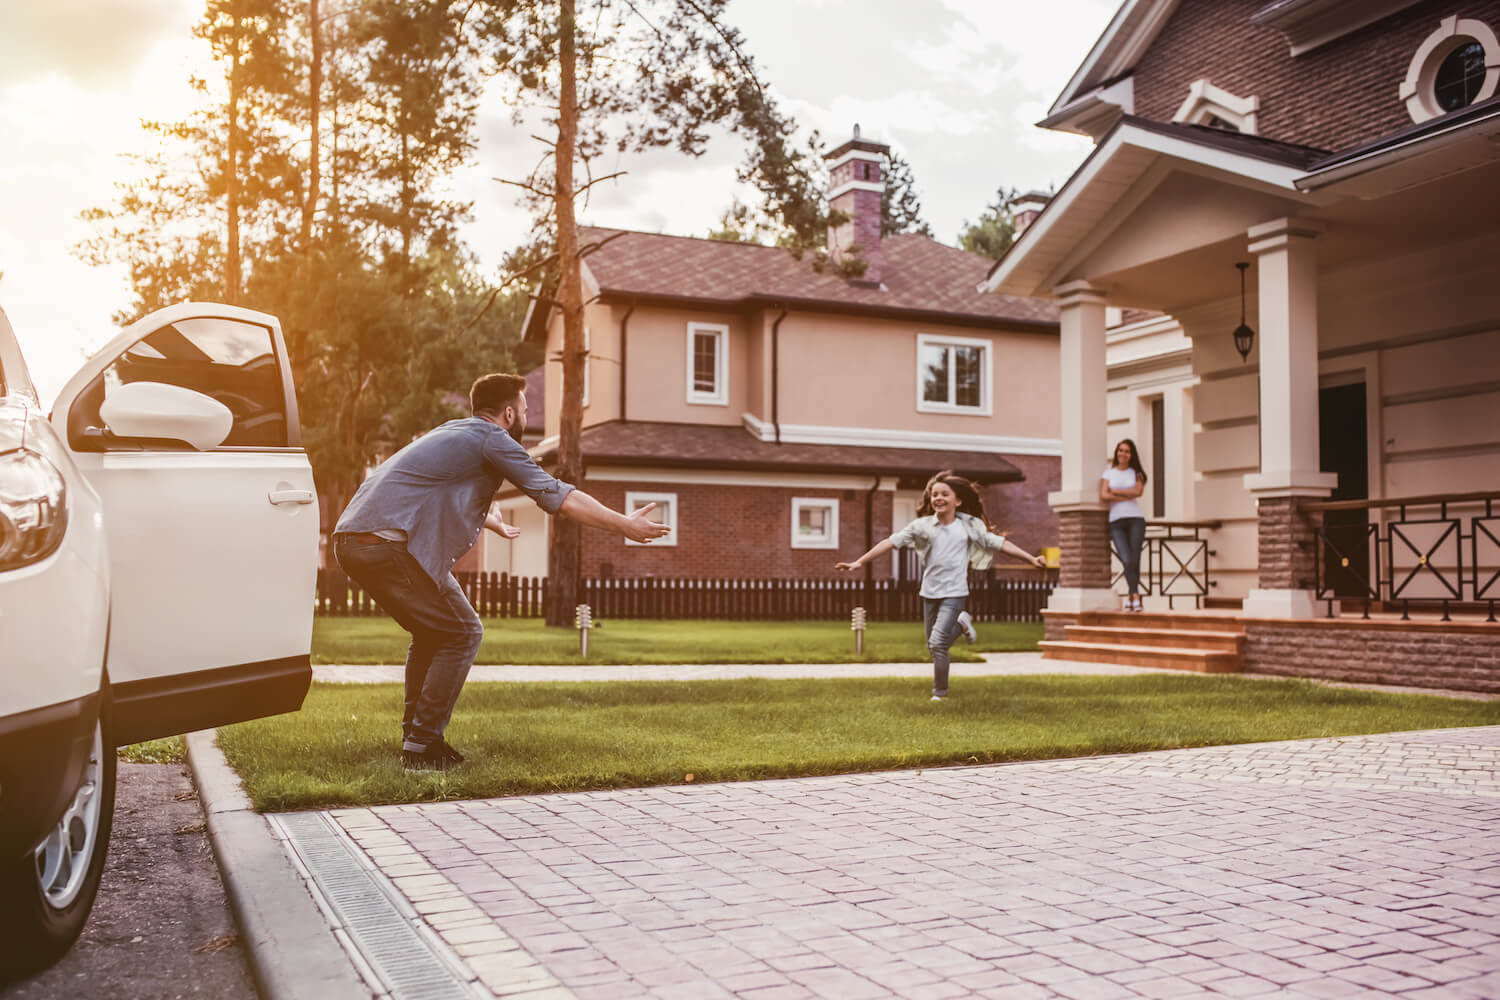 Dad arriving home and child running out on front lawn to greet him